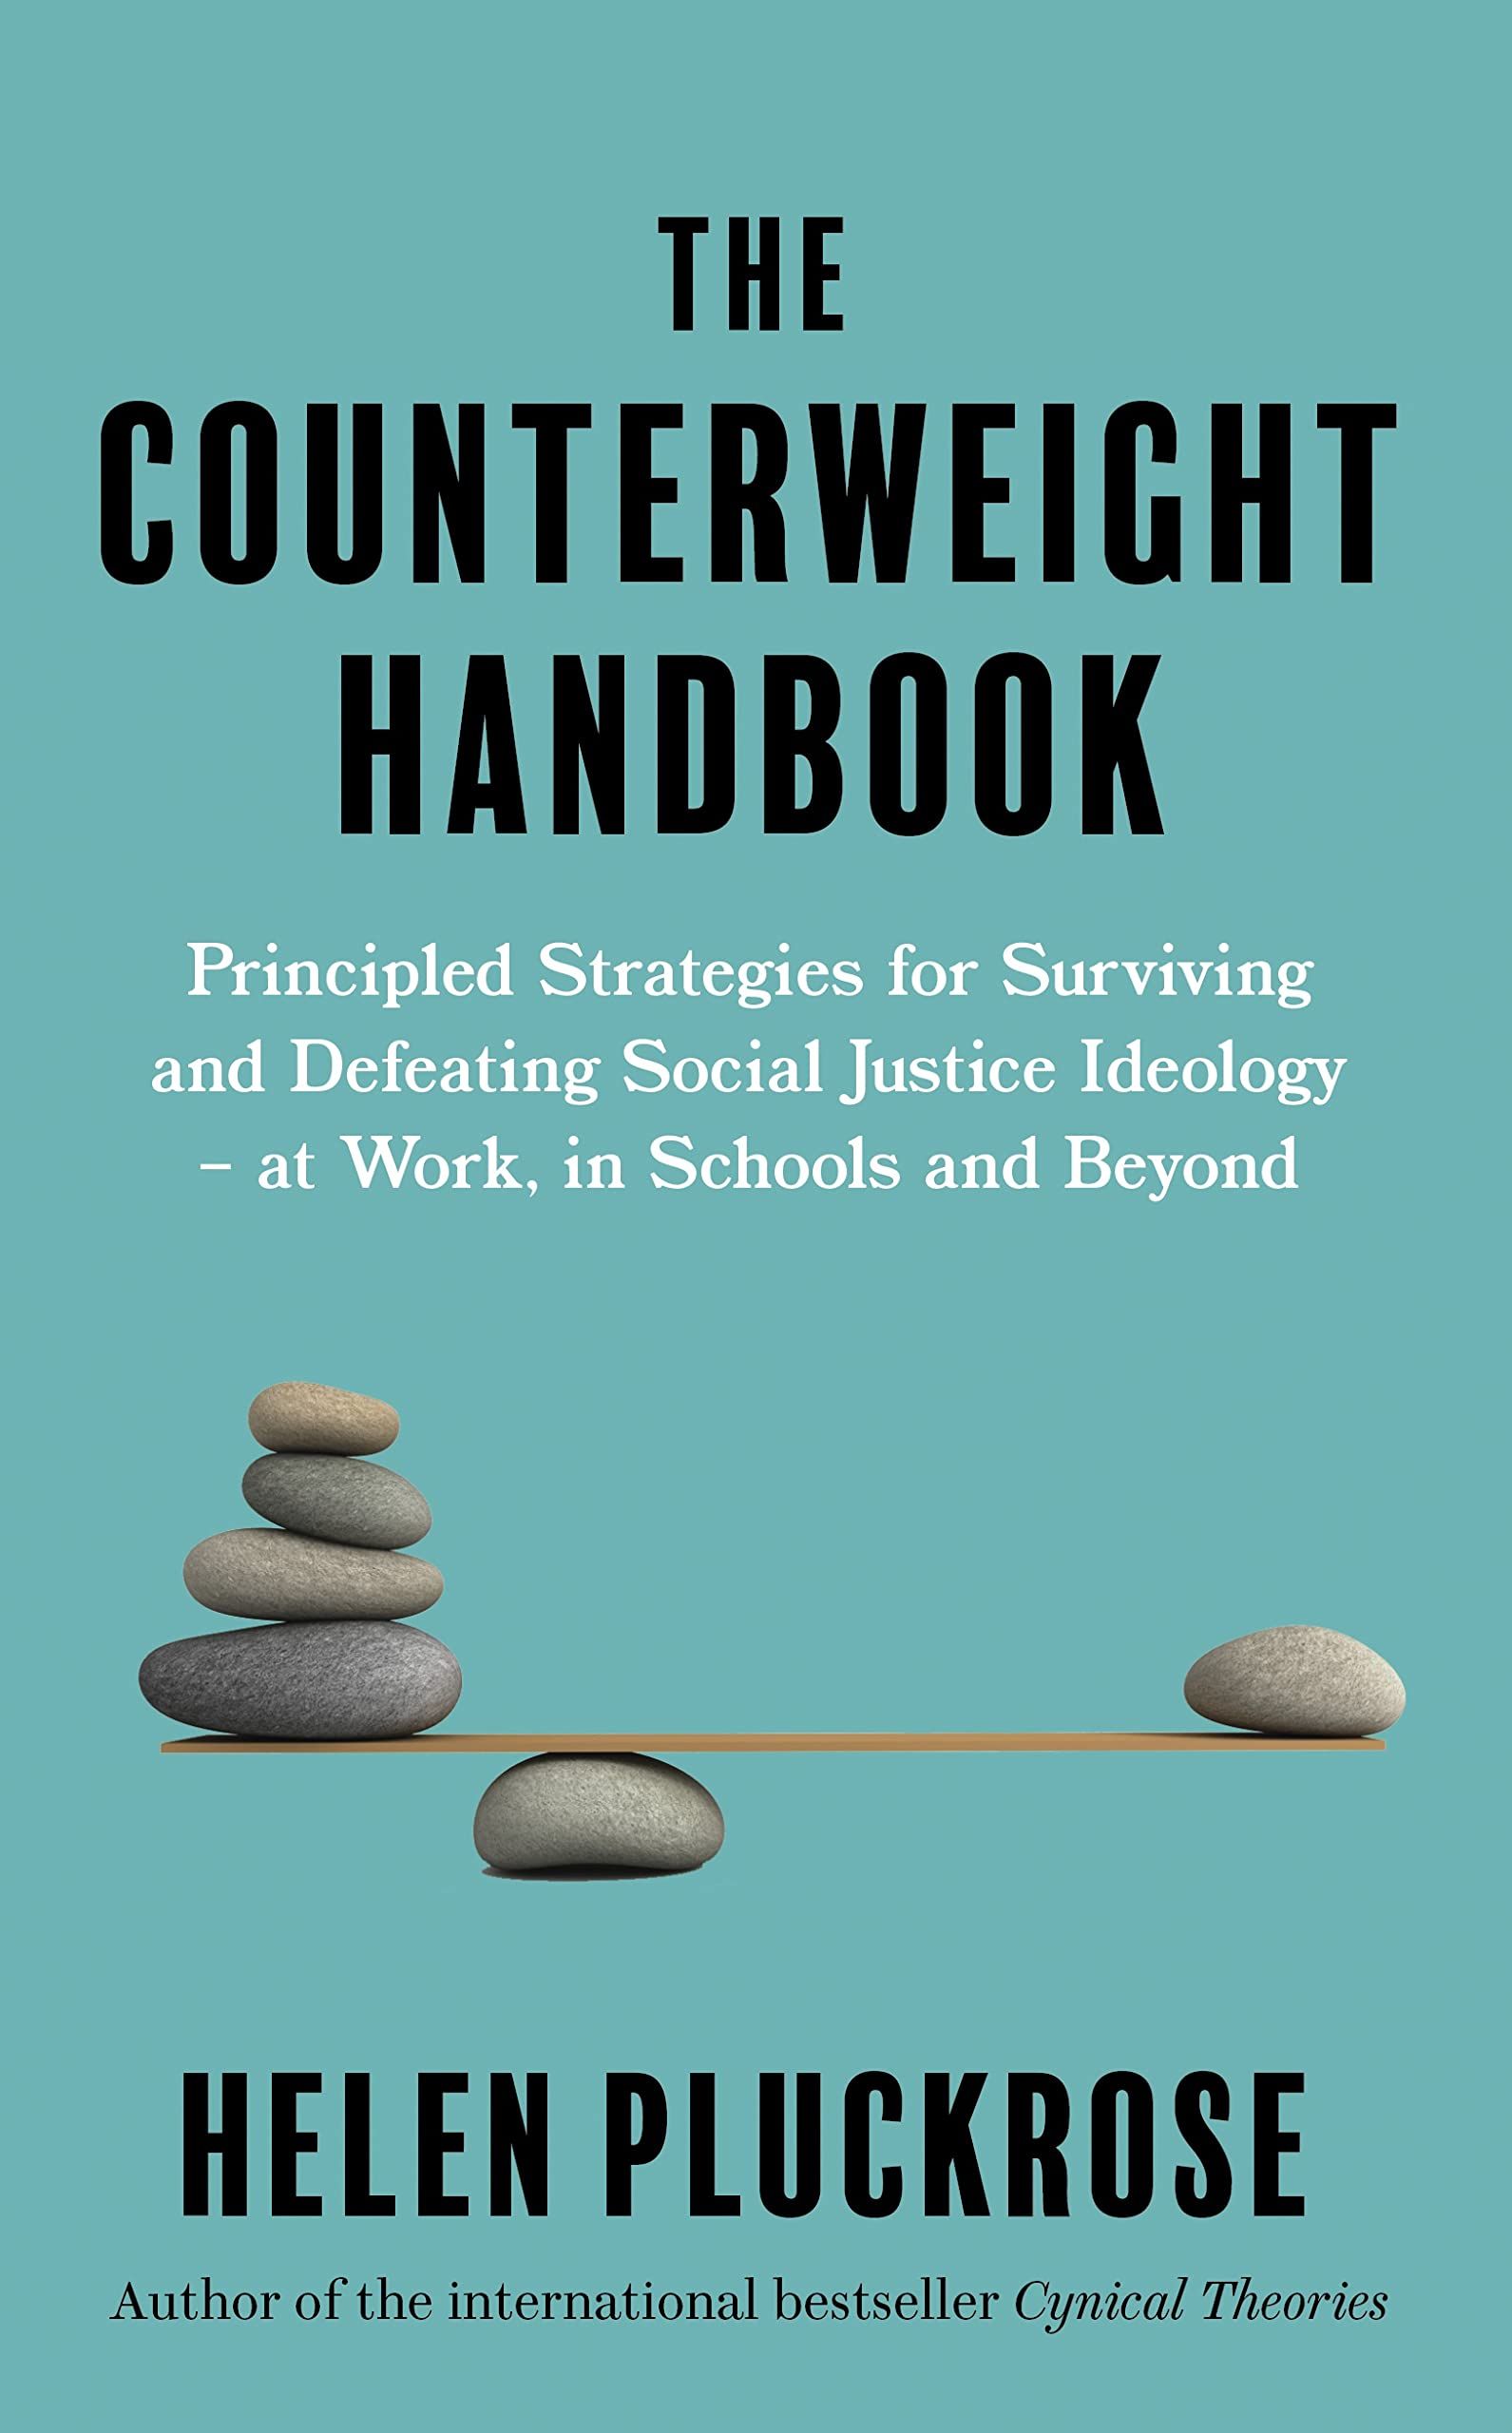 The Counterweight Handbook : Principled Strategies for Surviving and Defeating Critical Social Justice Ideology - at Work, in Schools and Beyond